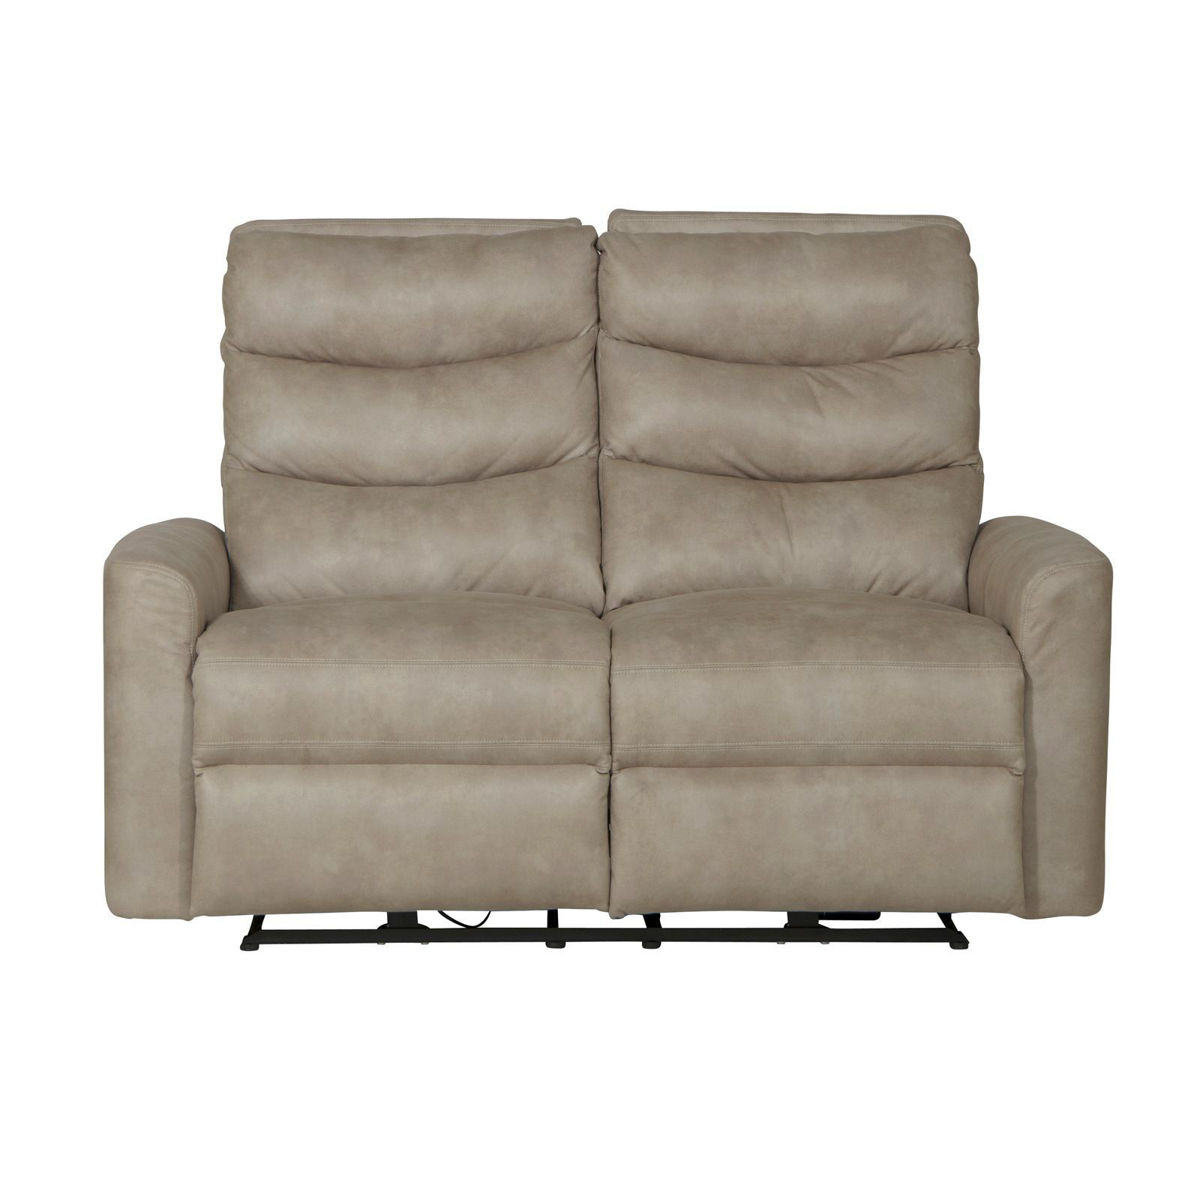 Picture of Gill Putty Power Recliner Loveseat